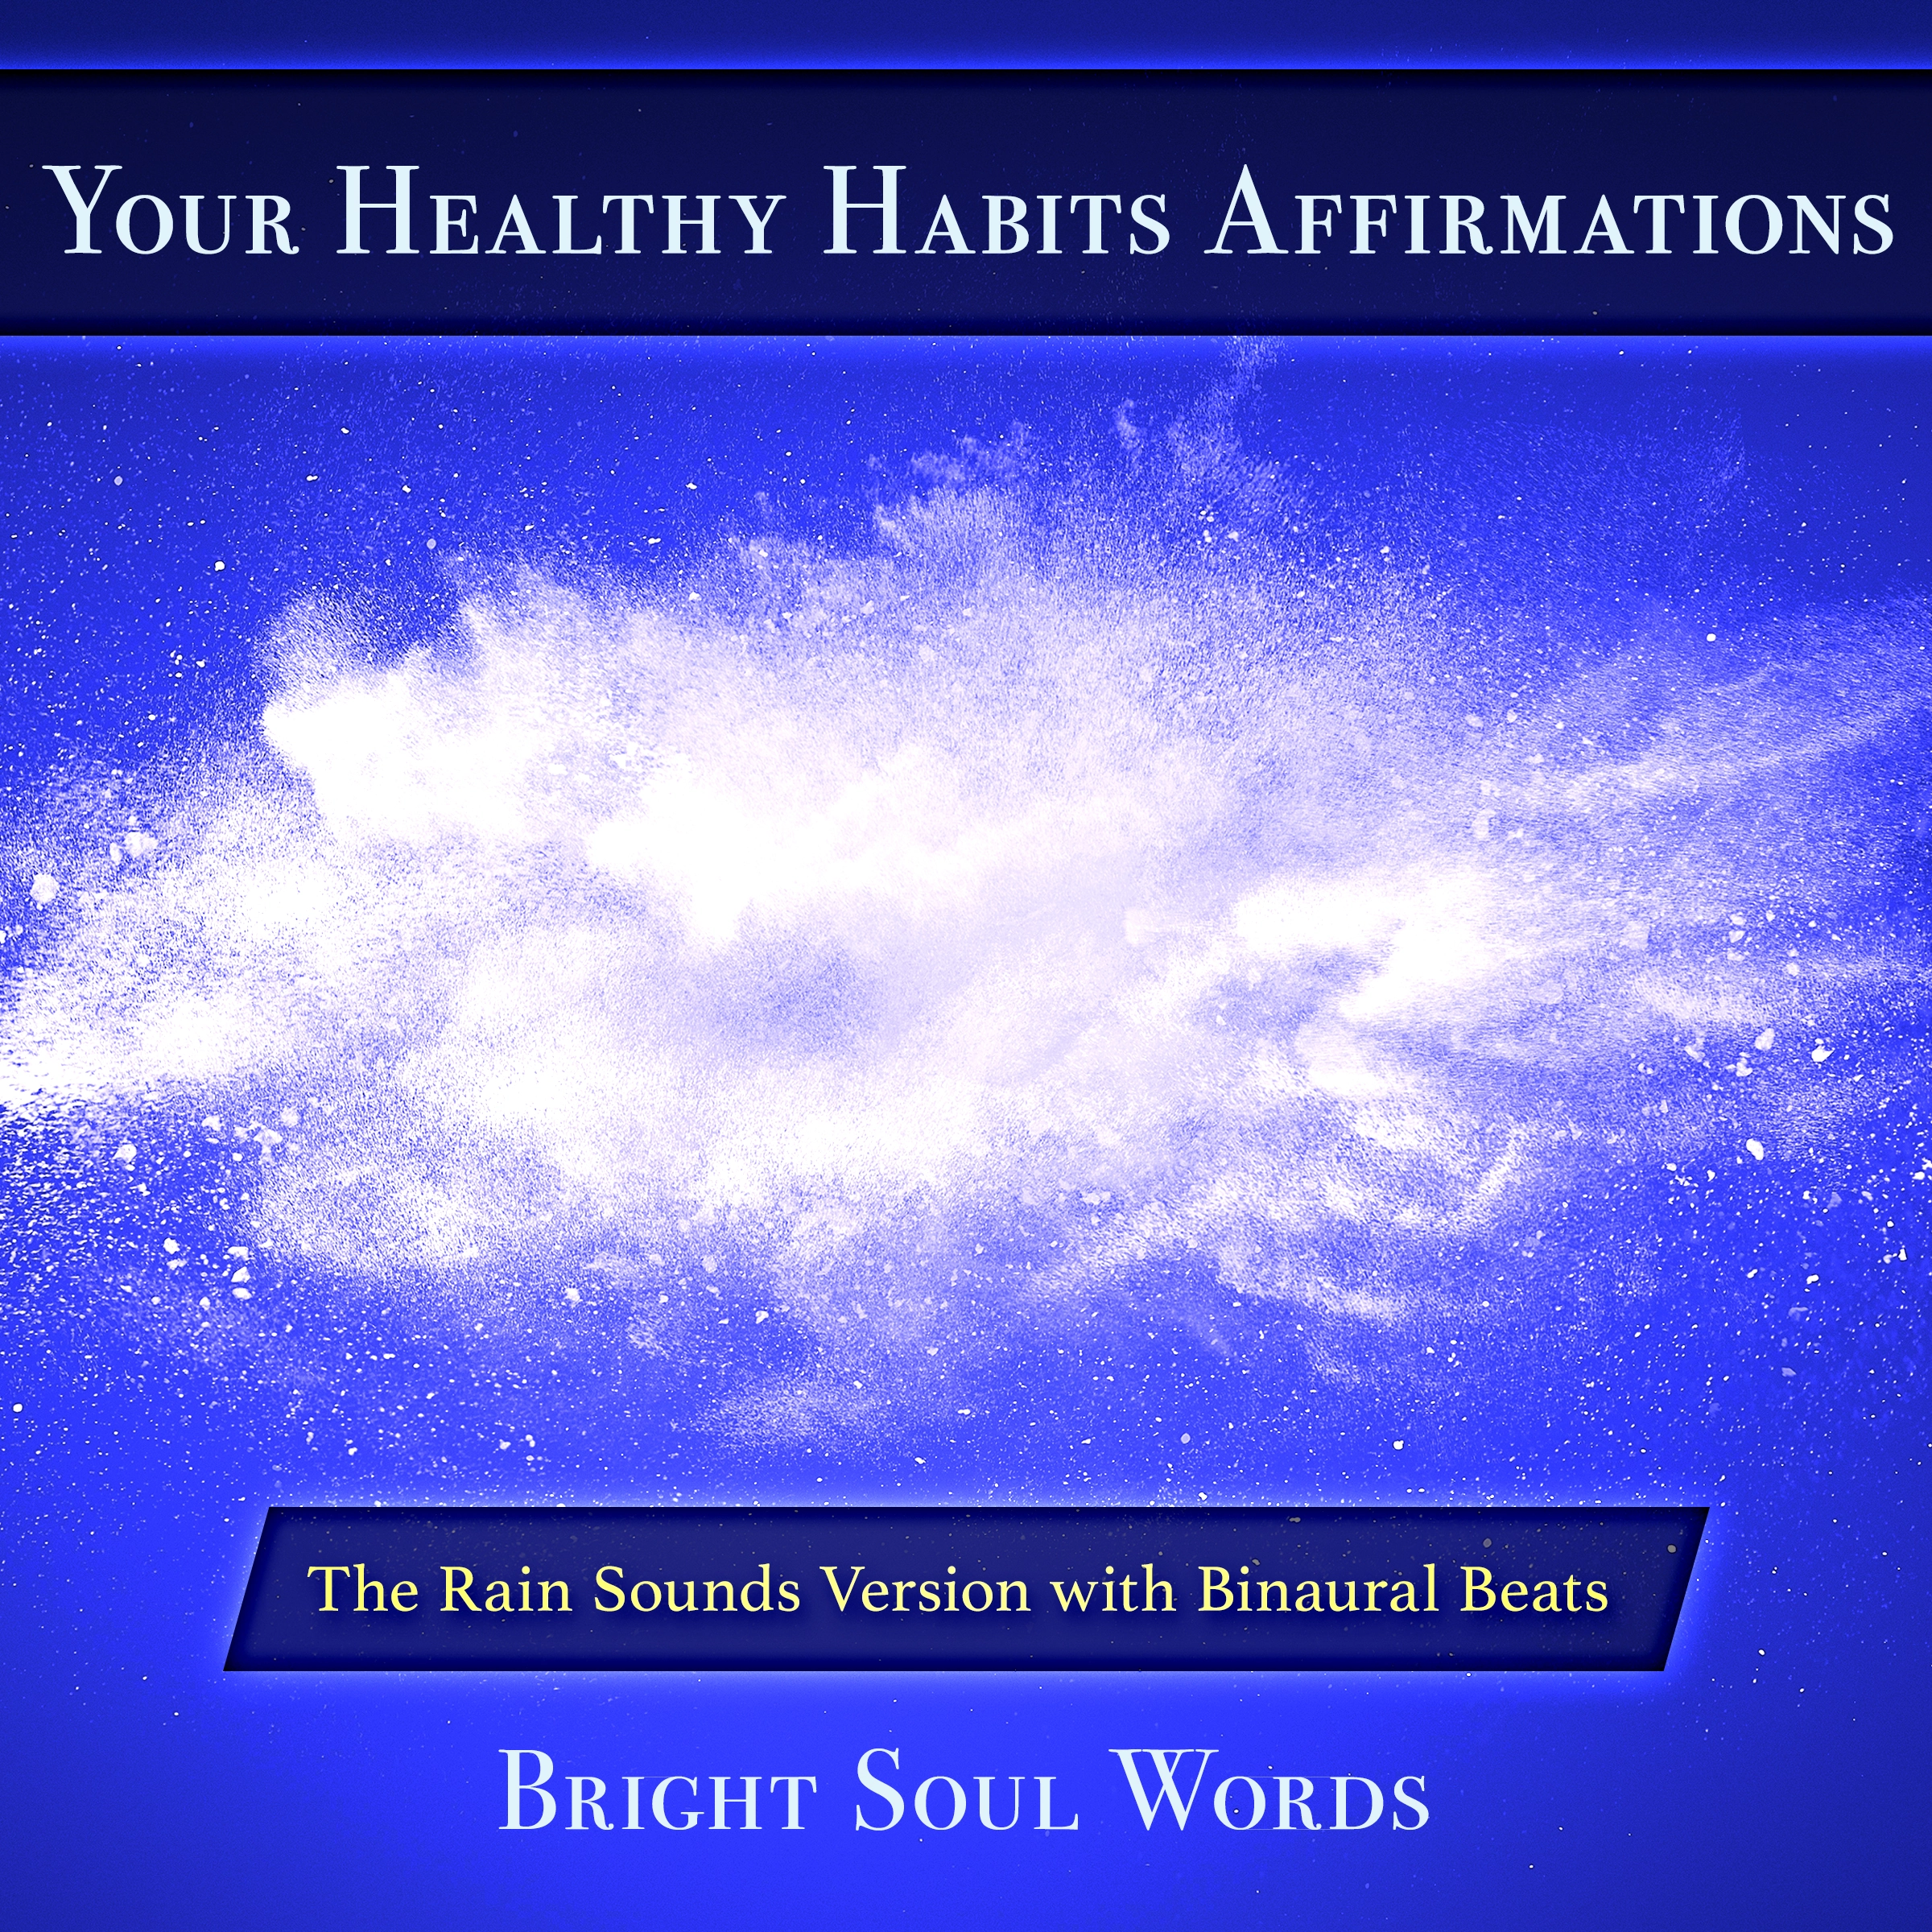 Your Healthy Habits Affirmations: The Rain Sounds Version with Binaural Beats Audiobook by Bright Soul Words